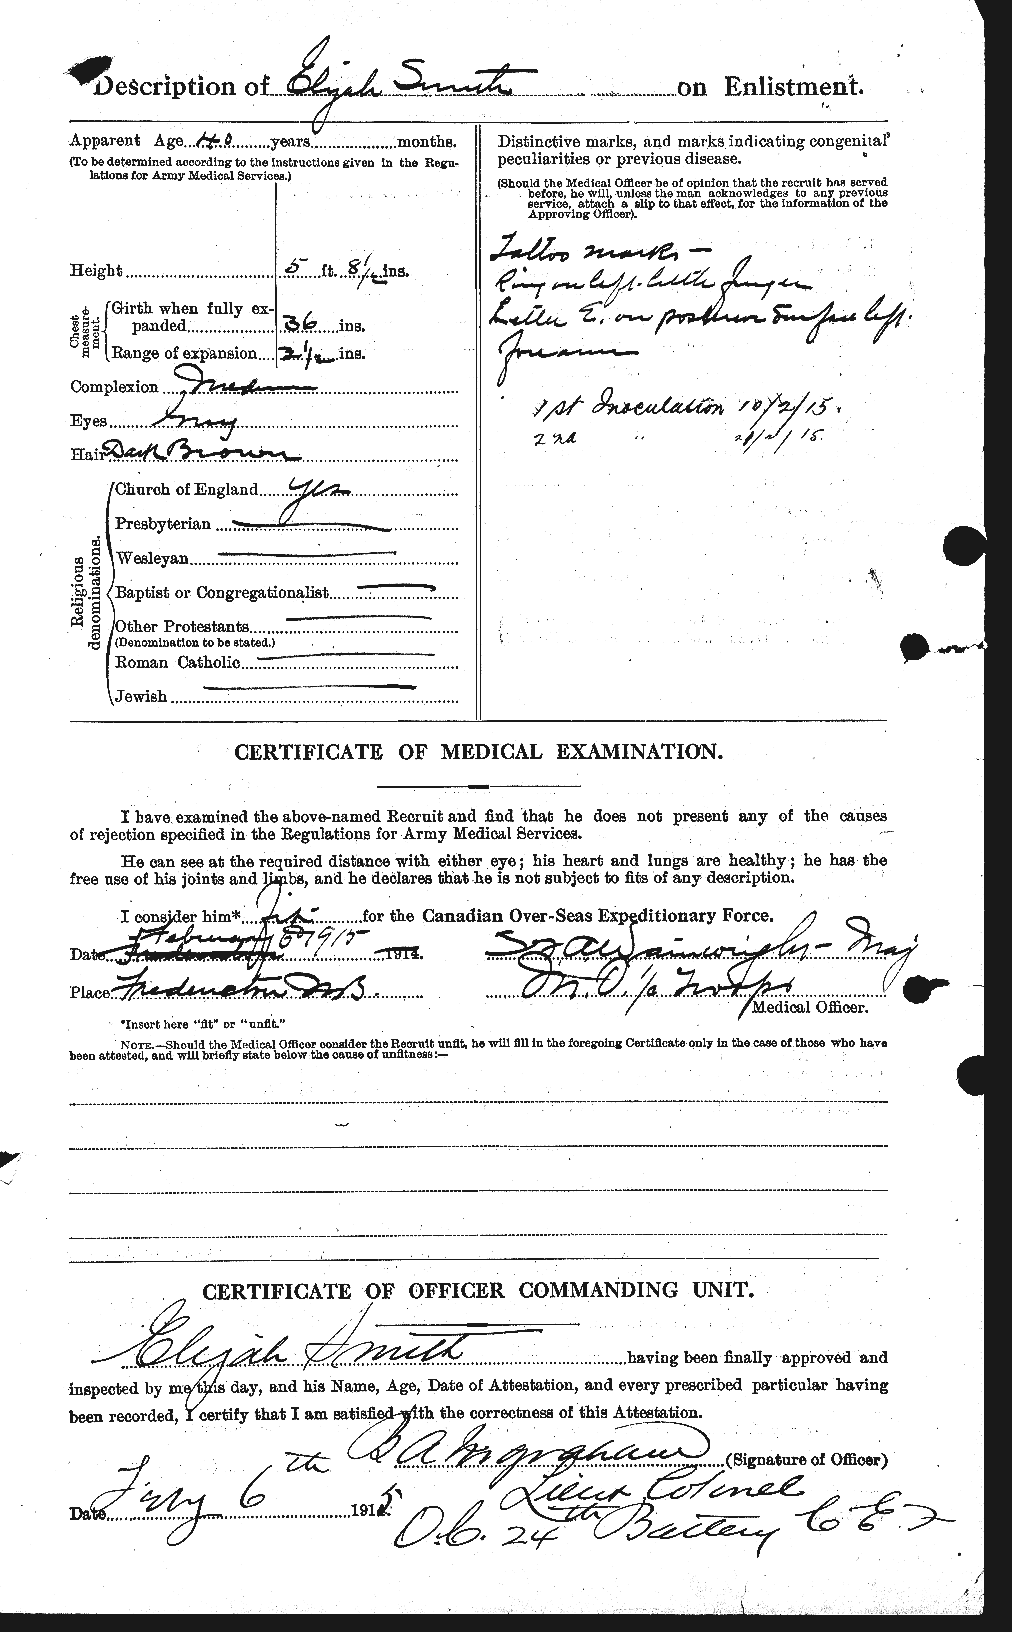 Personnel Records of the First World War - CEF 621091b